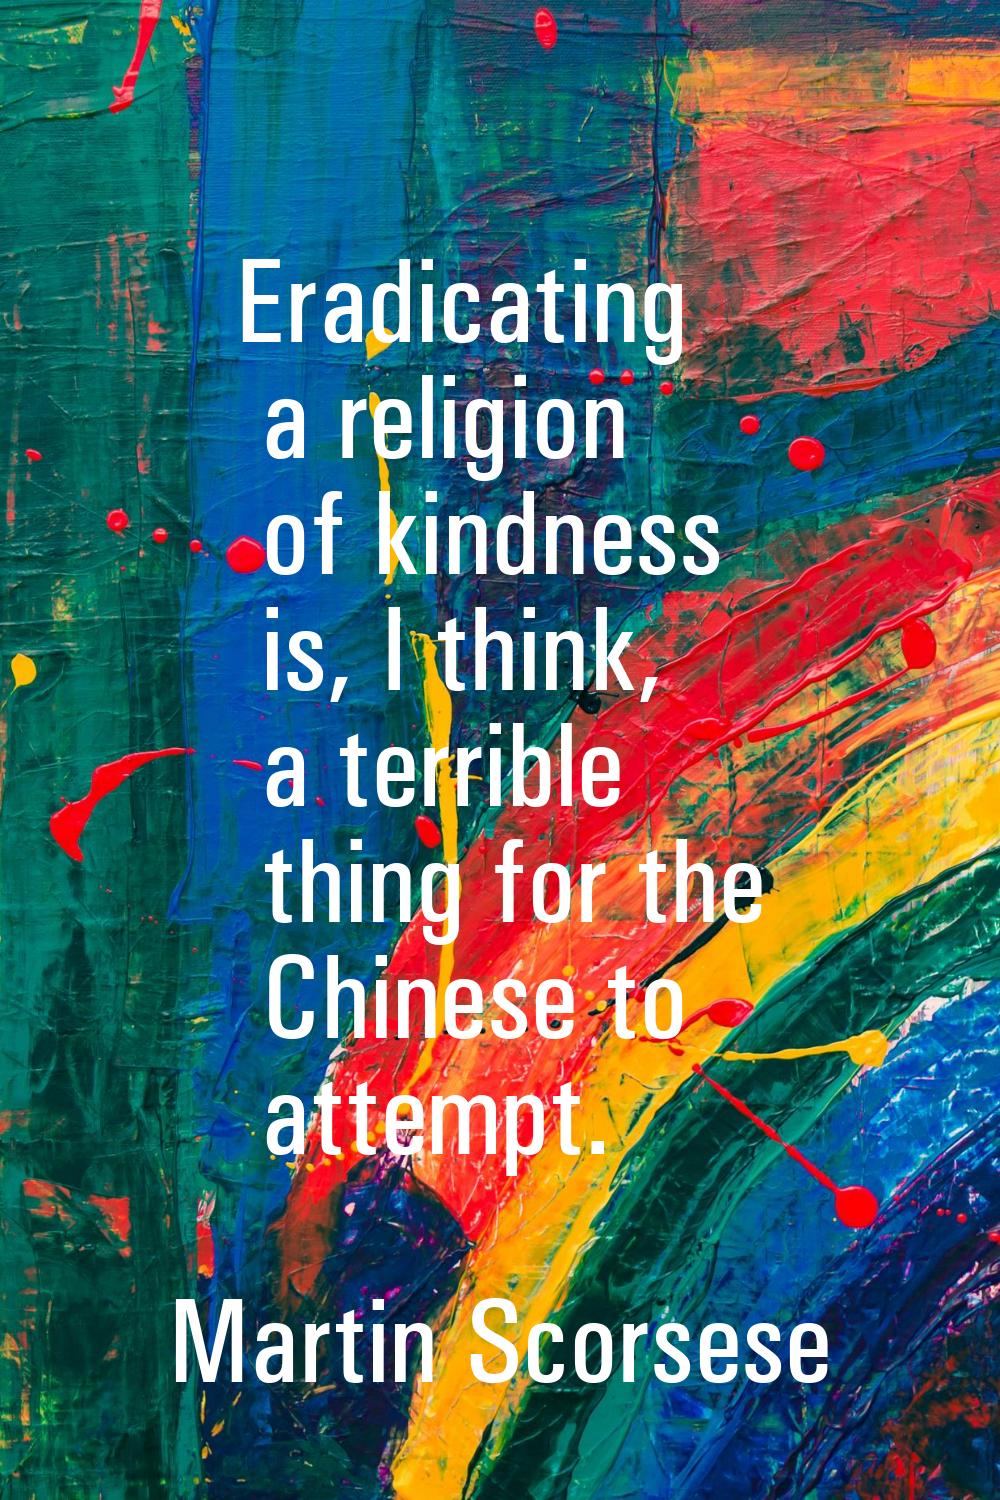 Eradicating a religion of kindness is, I think, a terrible thing for the Chinese to attempt.